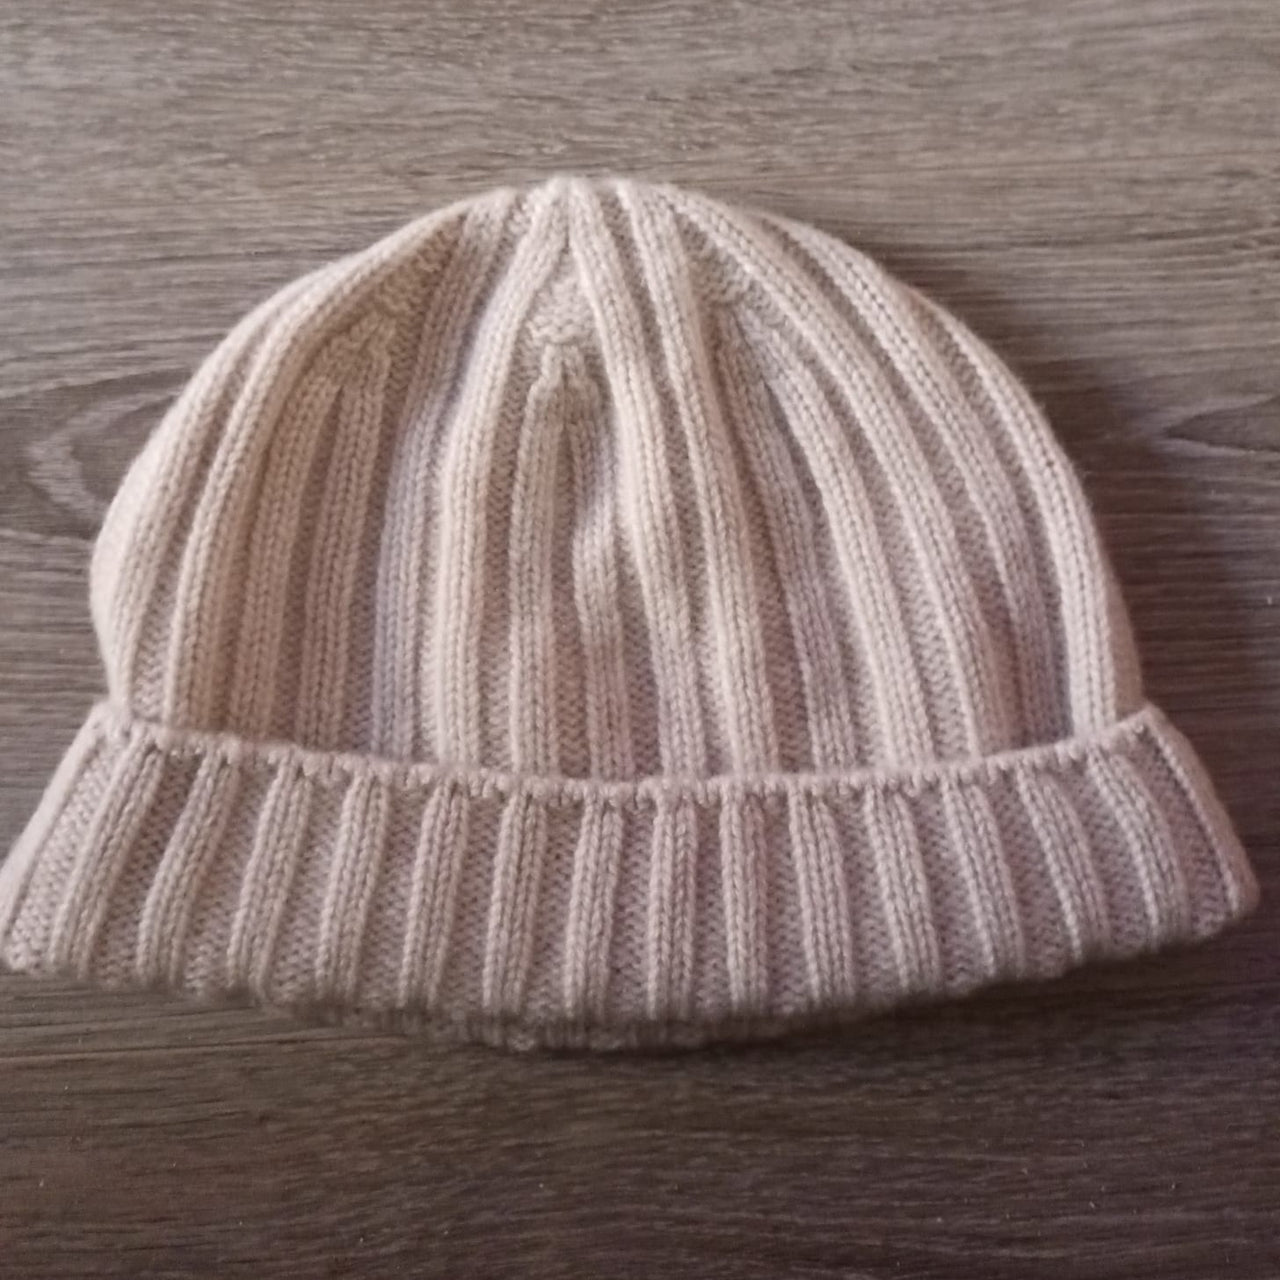 100% Cashmere Beanies